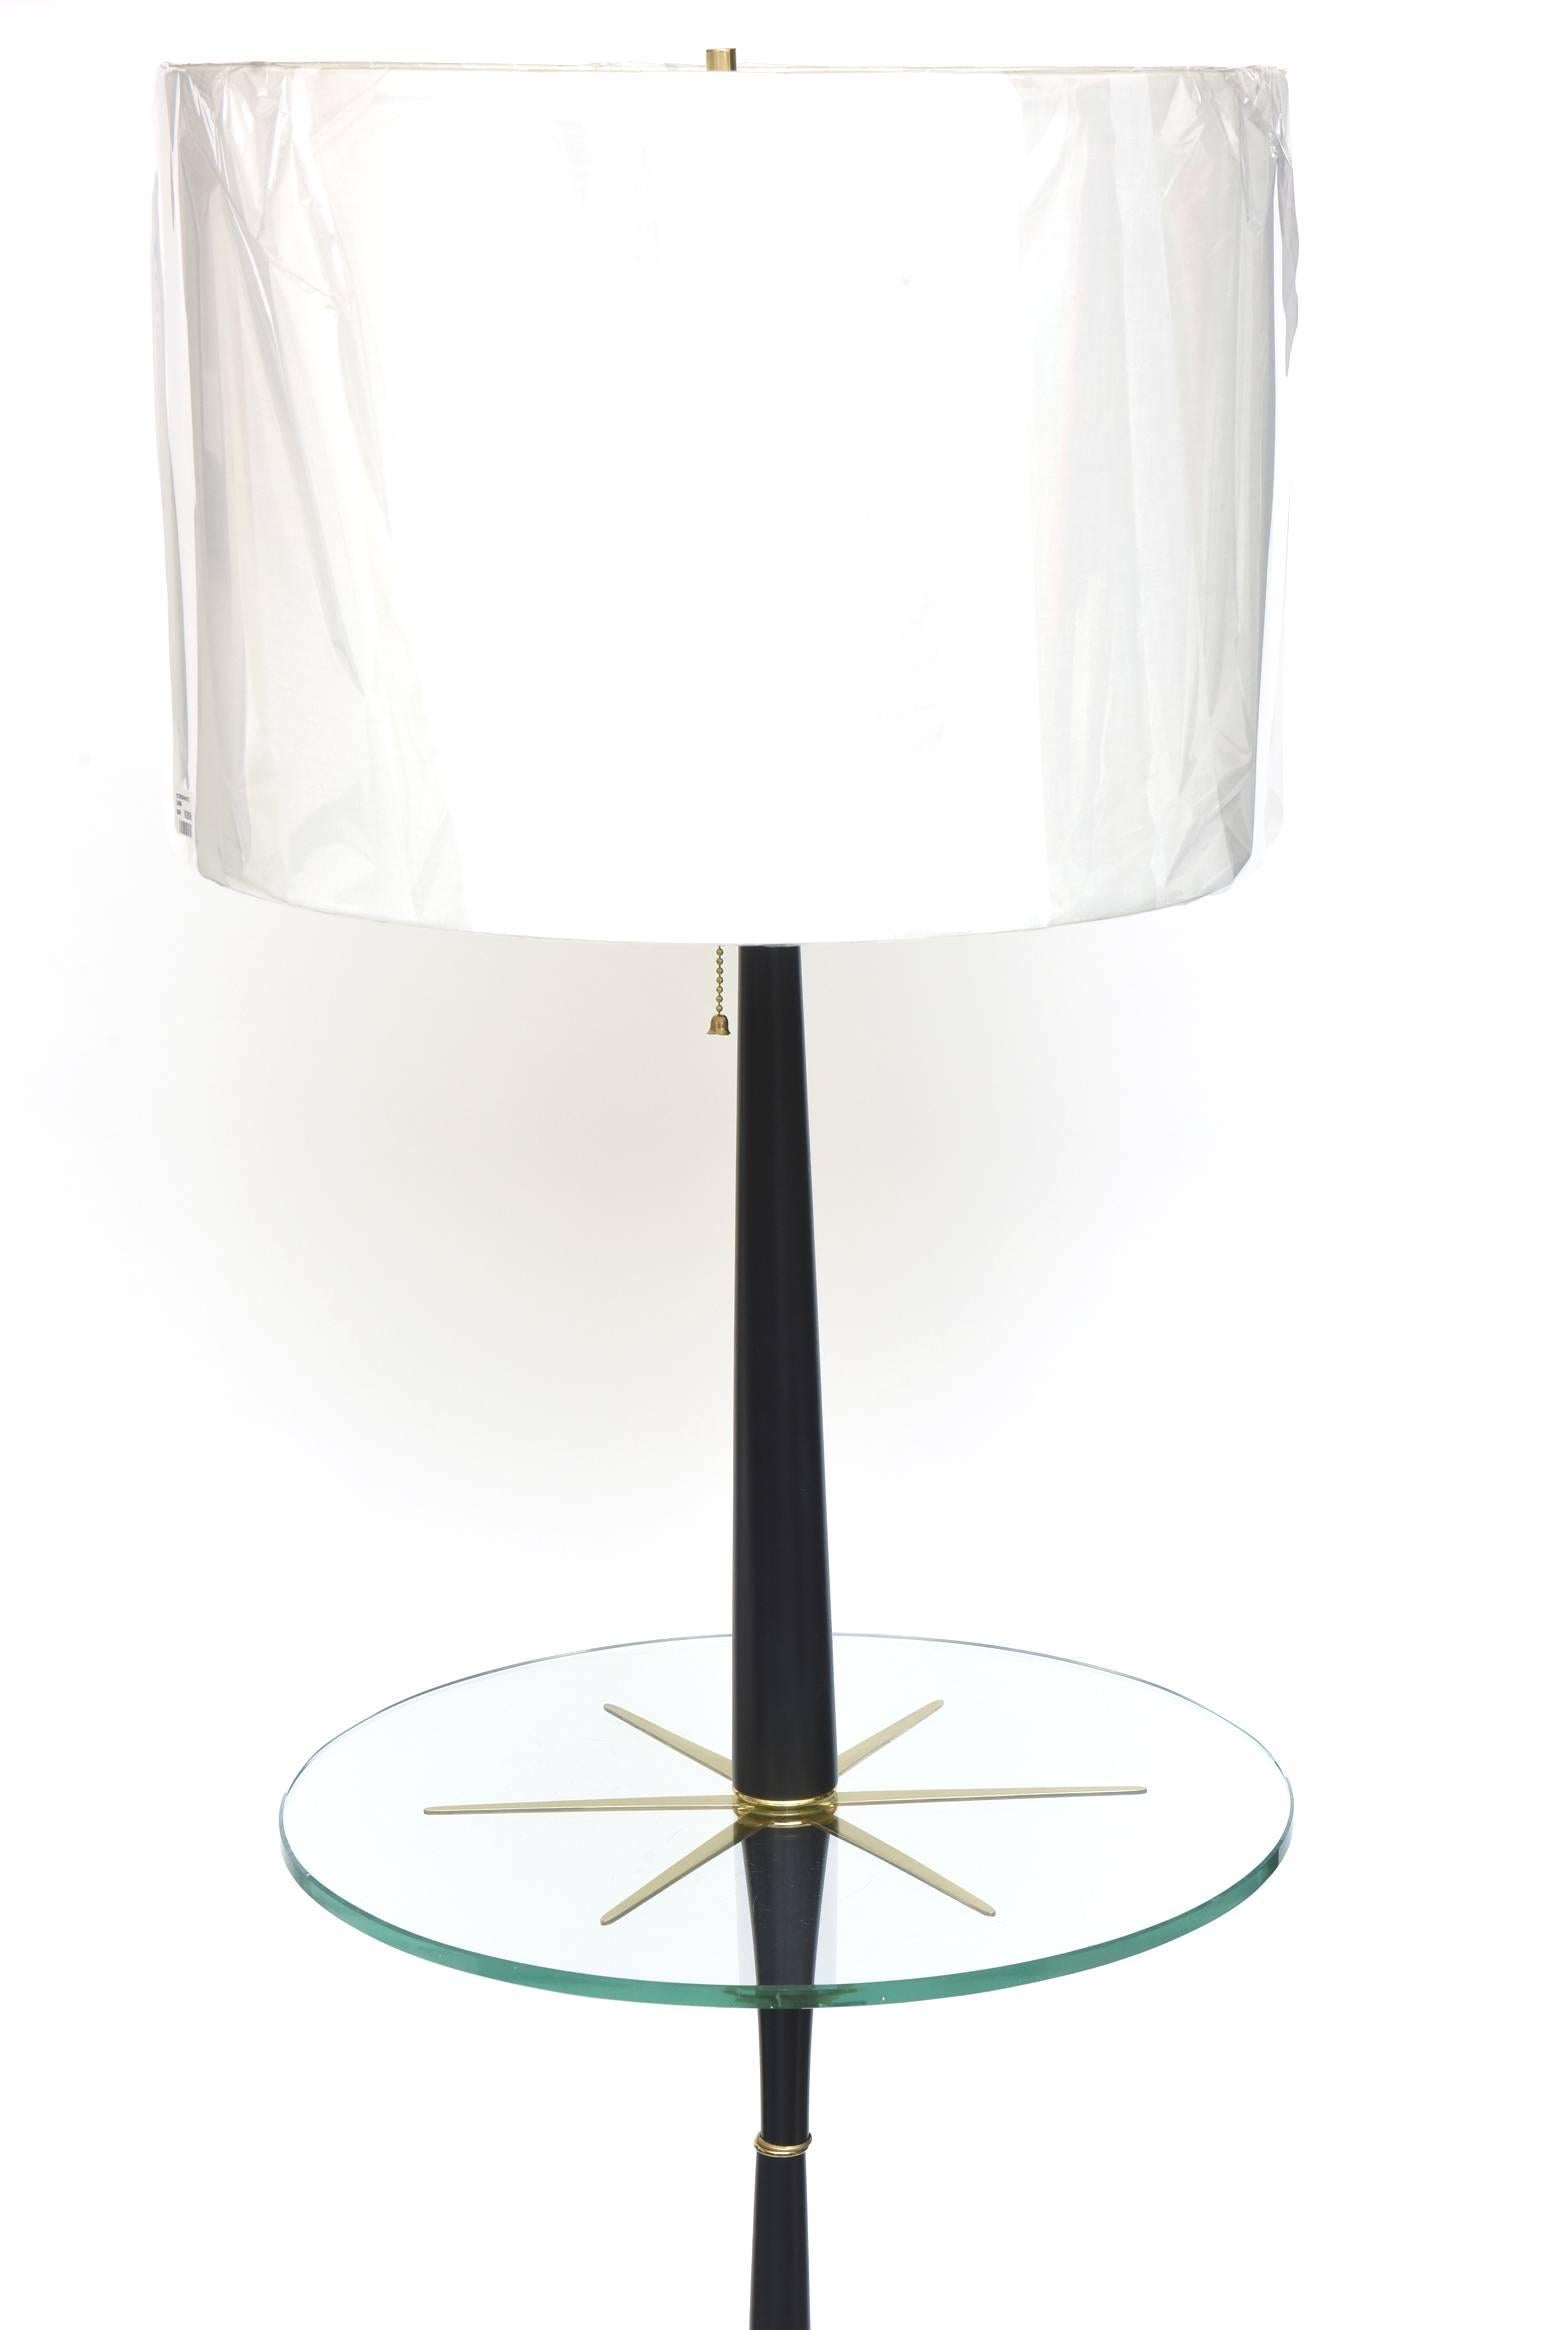 This wonderful wood and brass Mid-Century Modern lamp table and or floor lamp is the design of Tommi Parzinger and has been fully restored. All the brass details have been professionally polished and the wood has been ebonized with a satin finish.